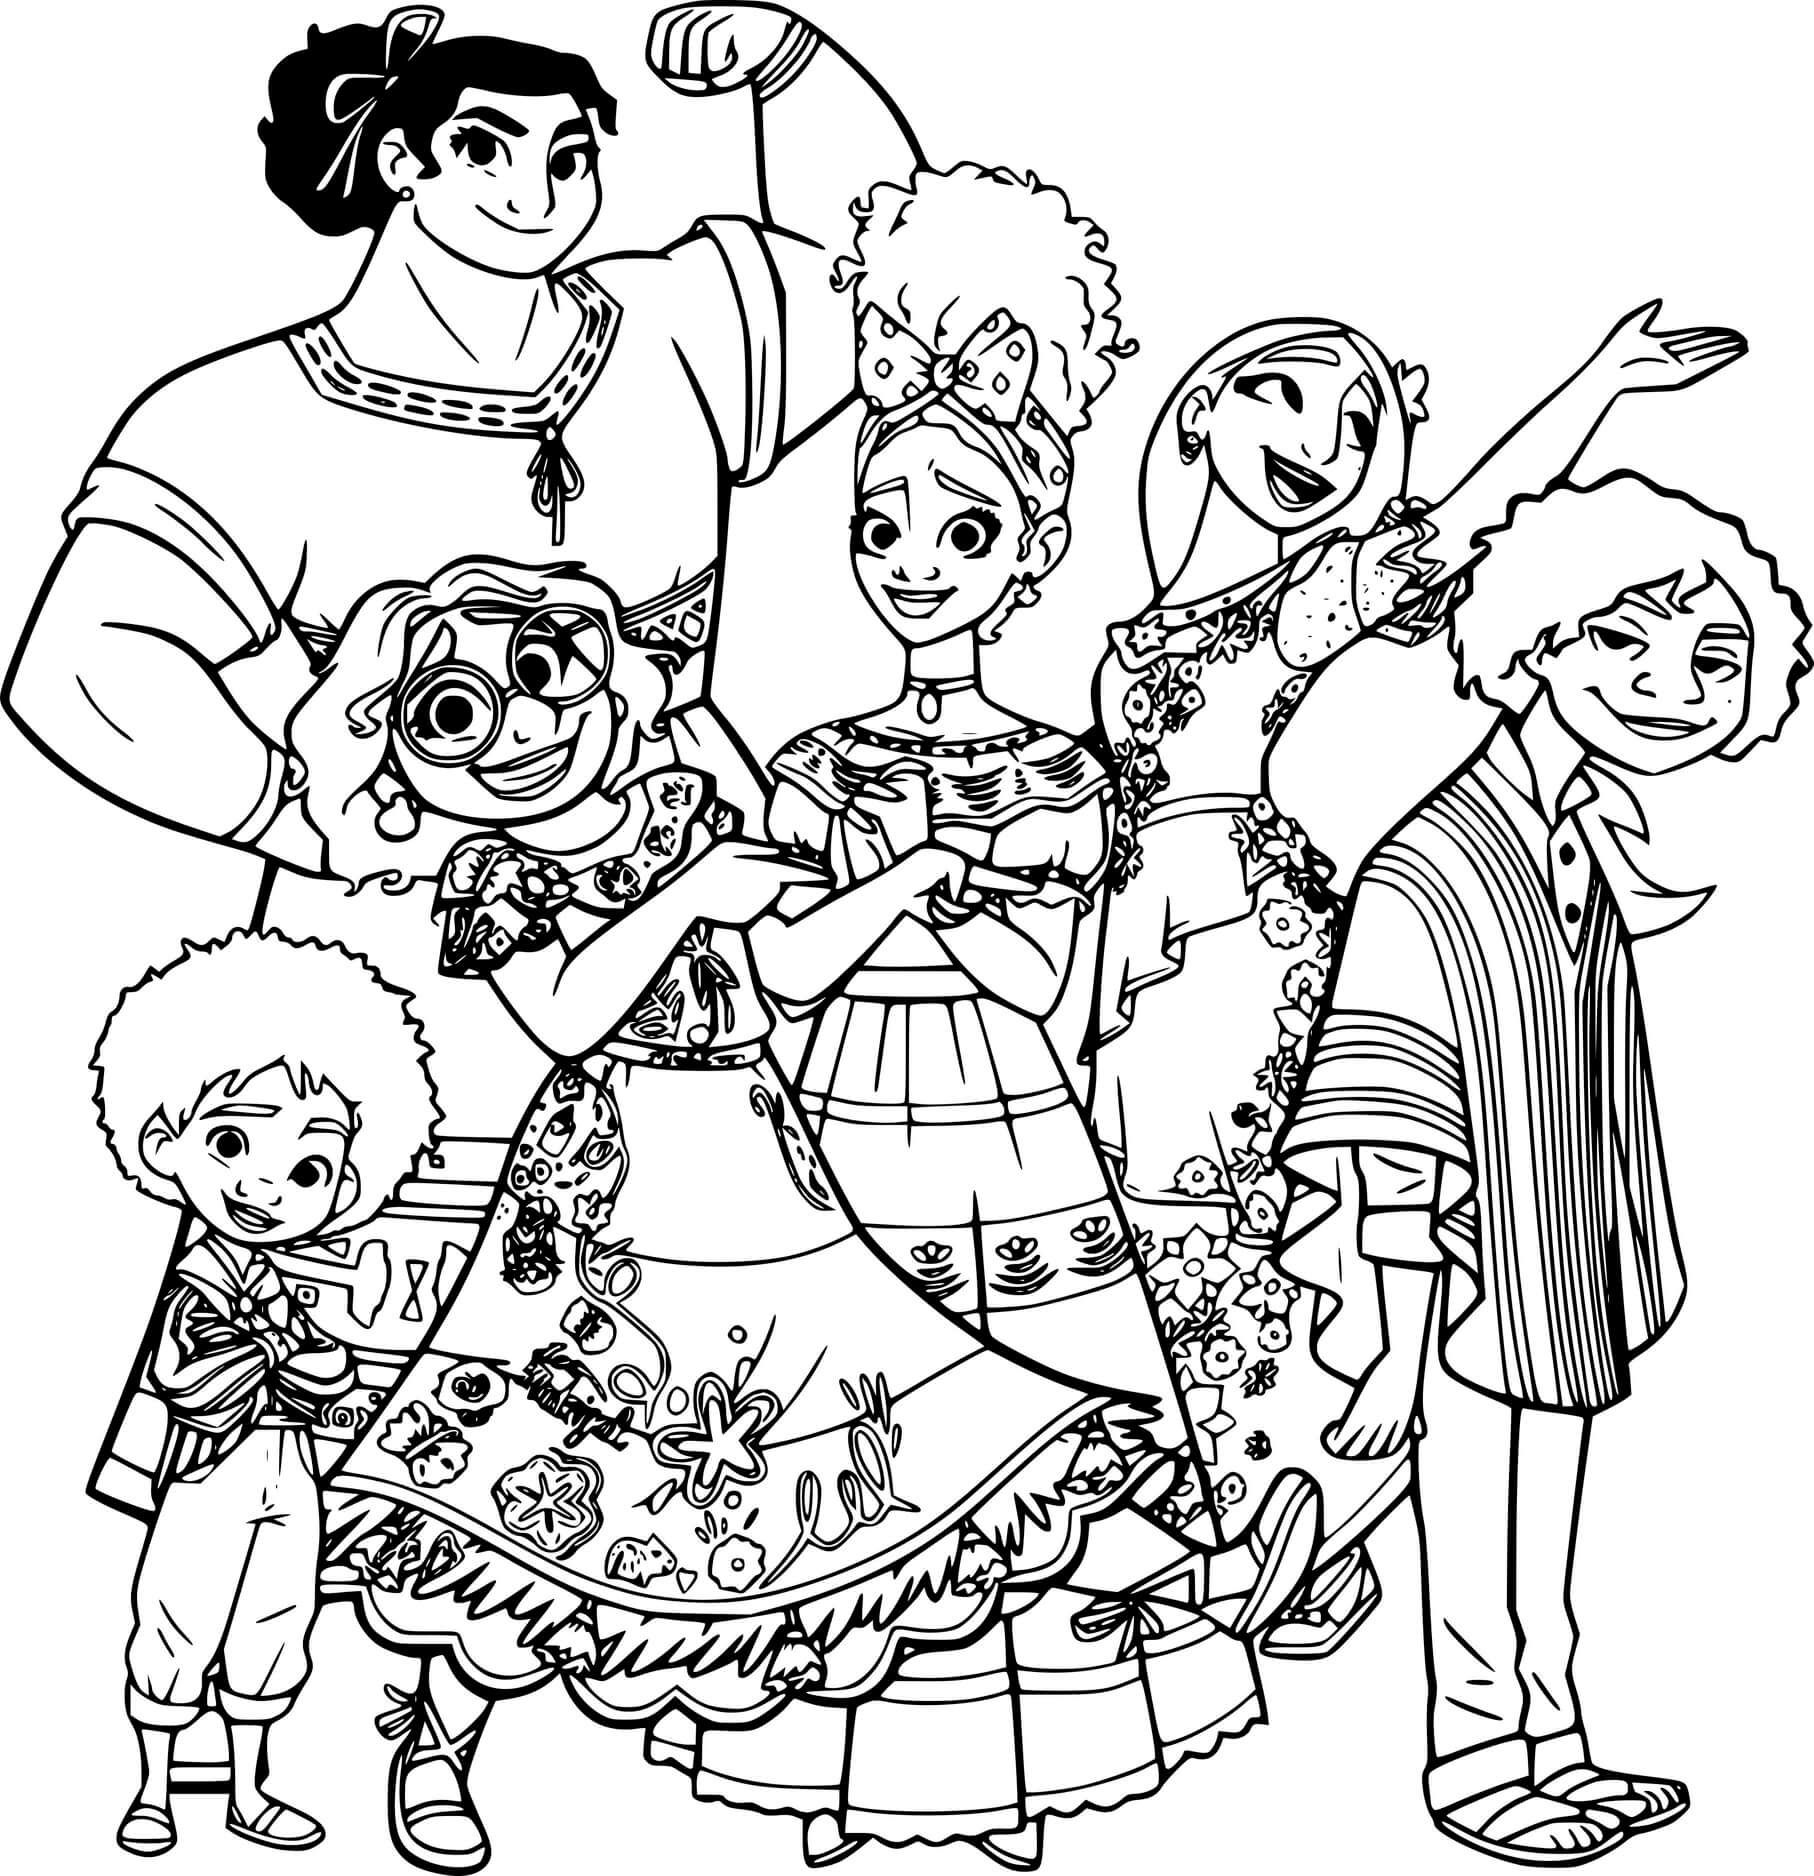 Madrigal Family Coloring Page